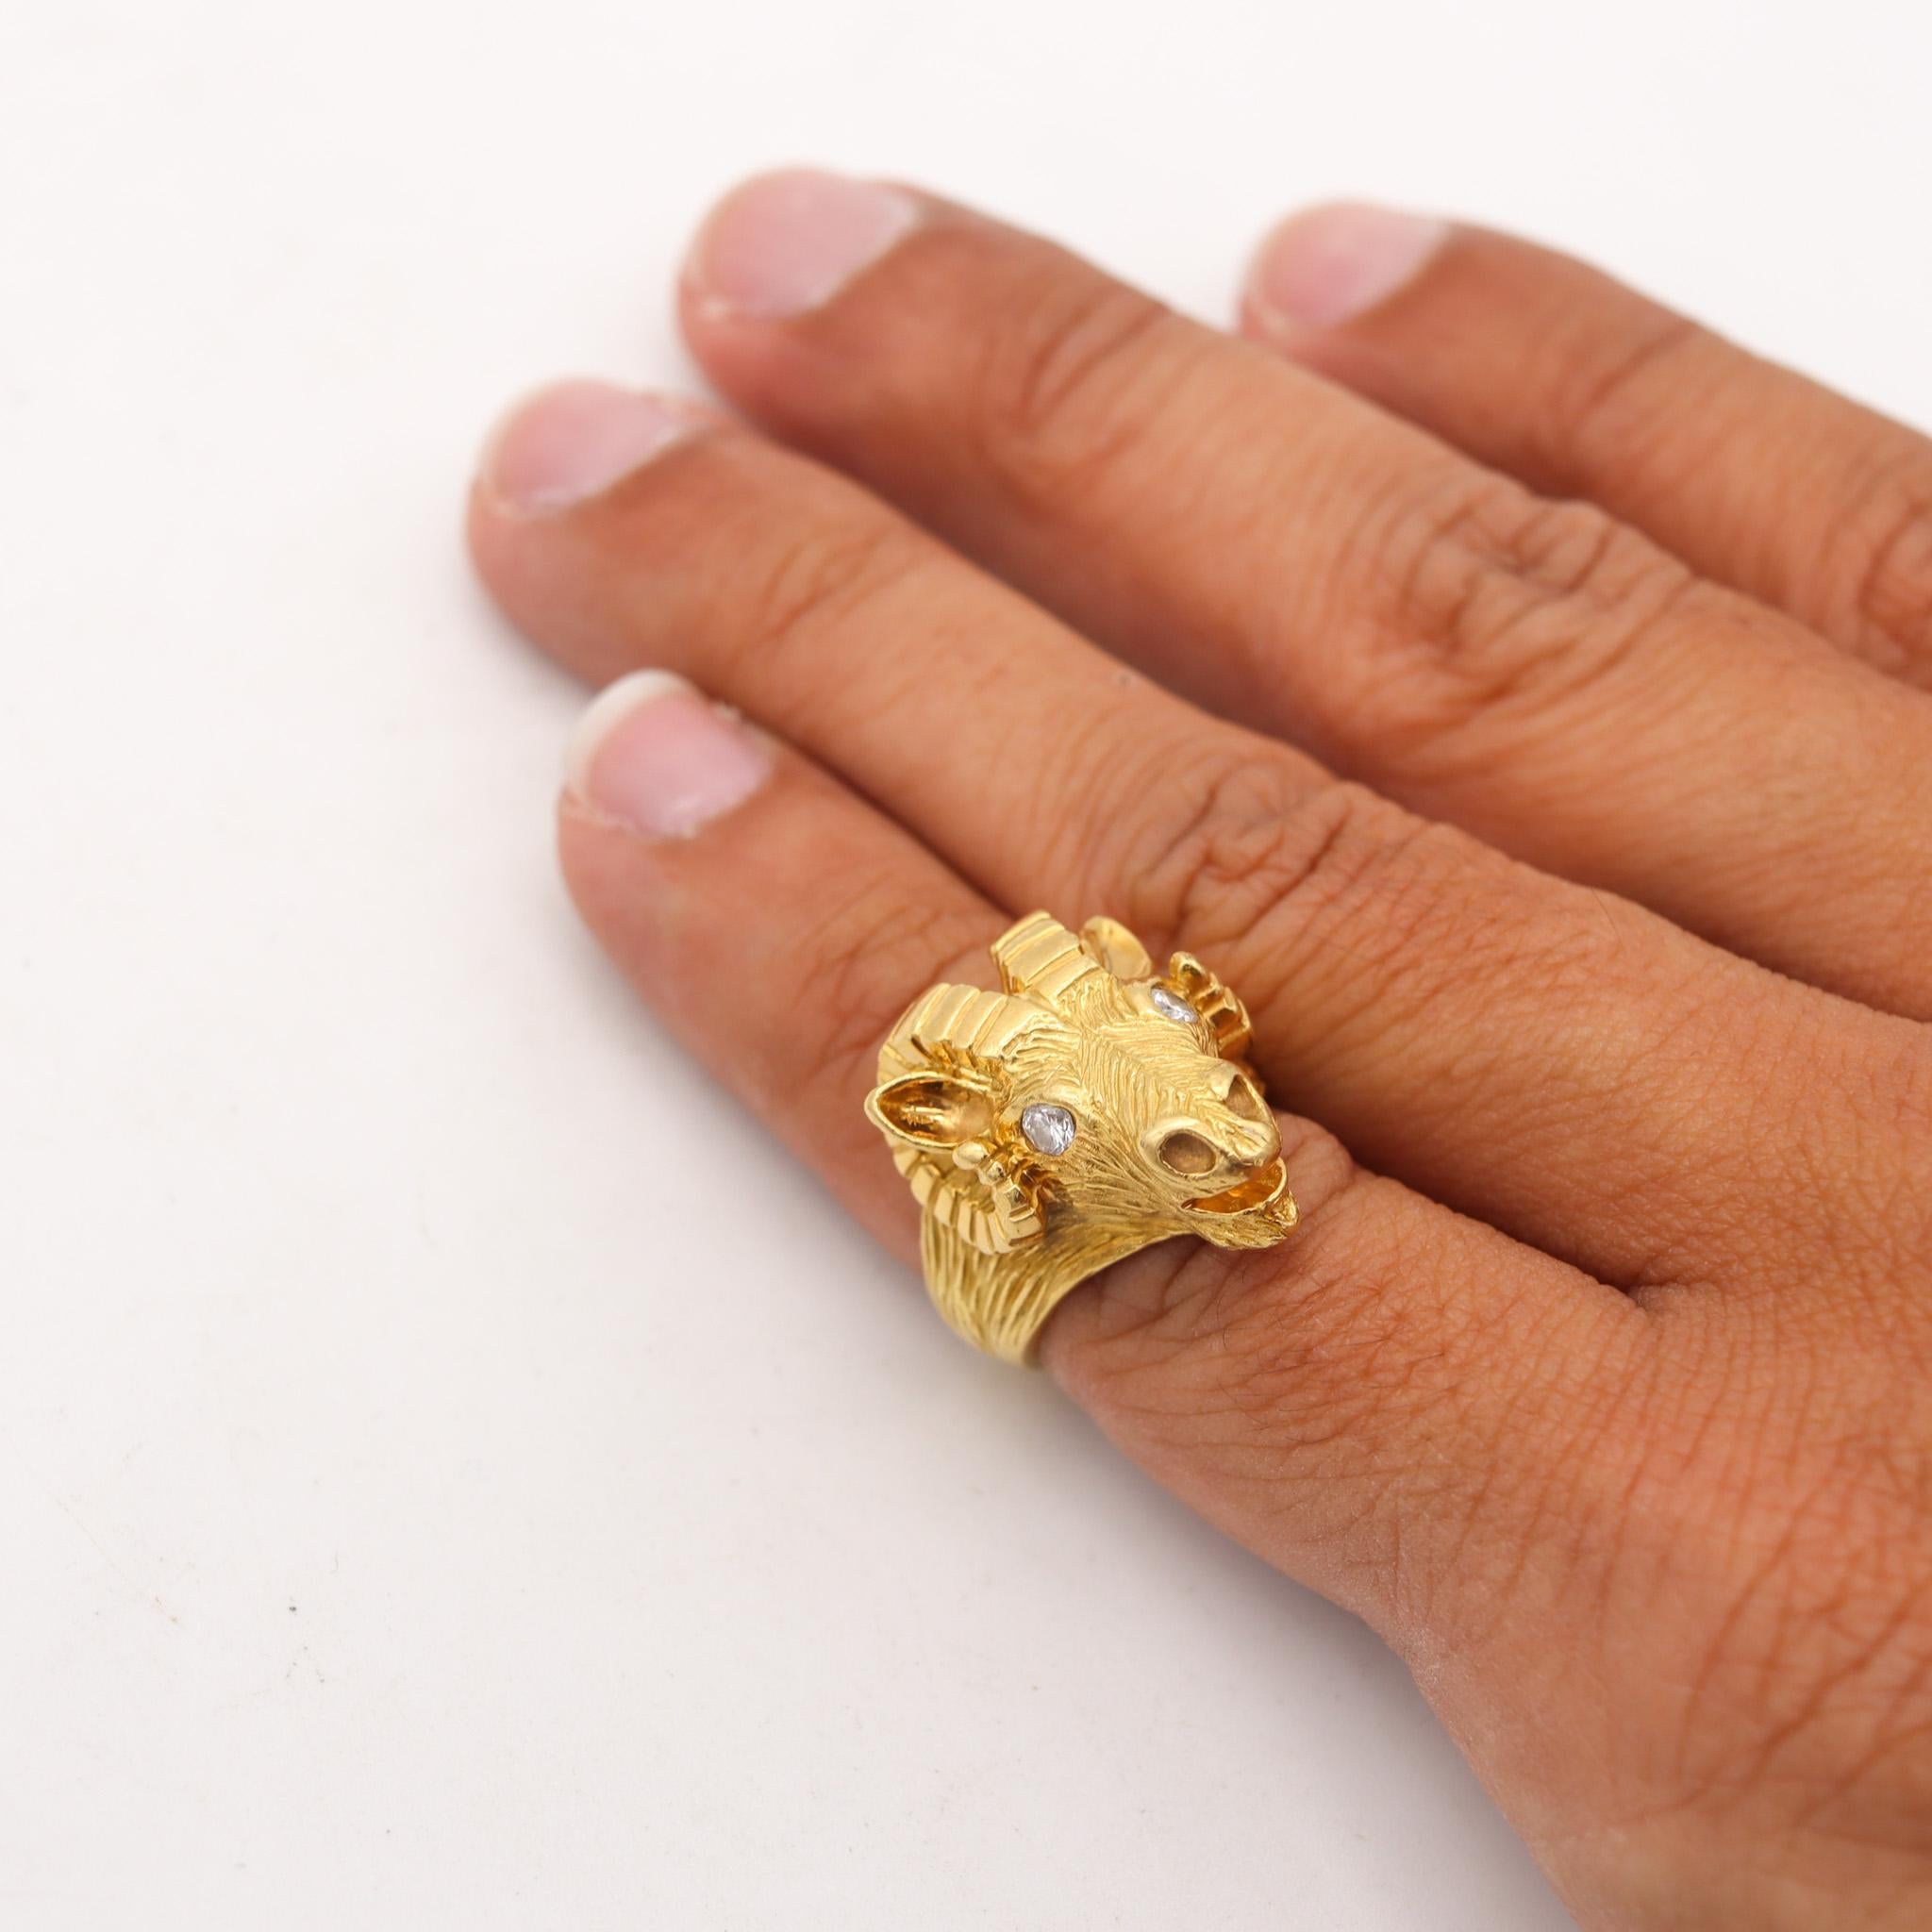 Van Cleef & Arpels 1970 Taurus Zodiacal Ring In 18Kt Gold With Two Diamonds 1